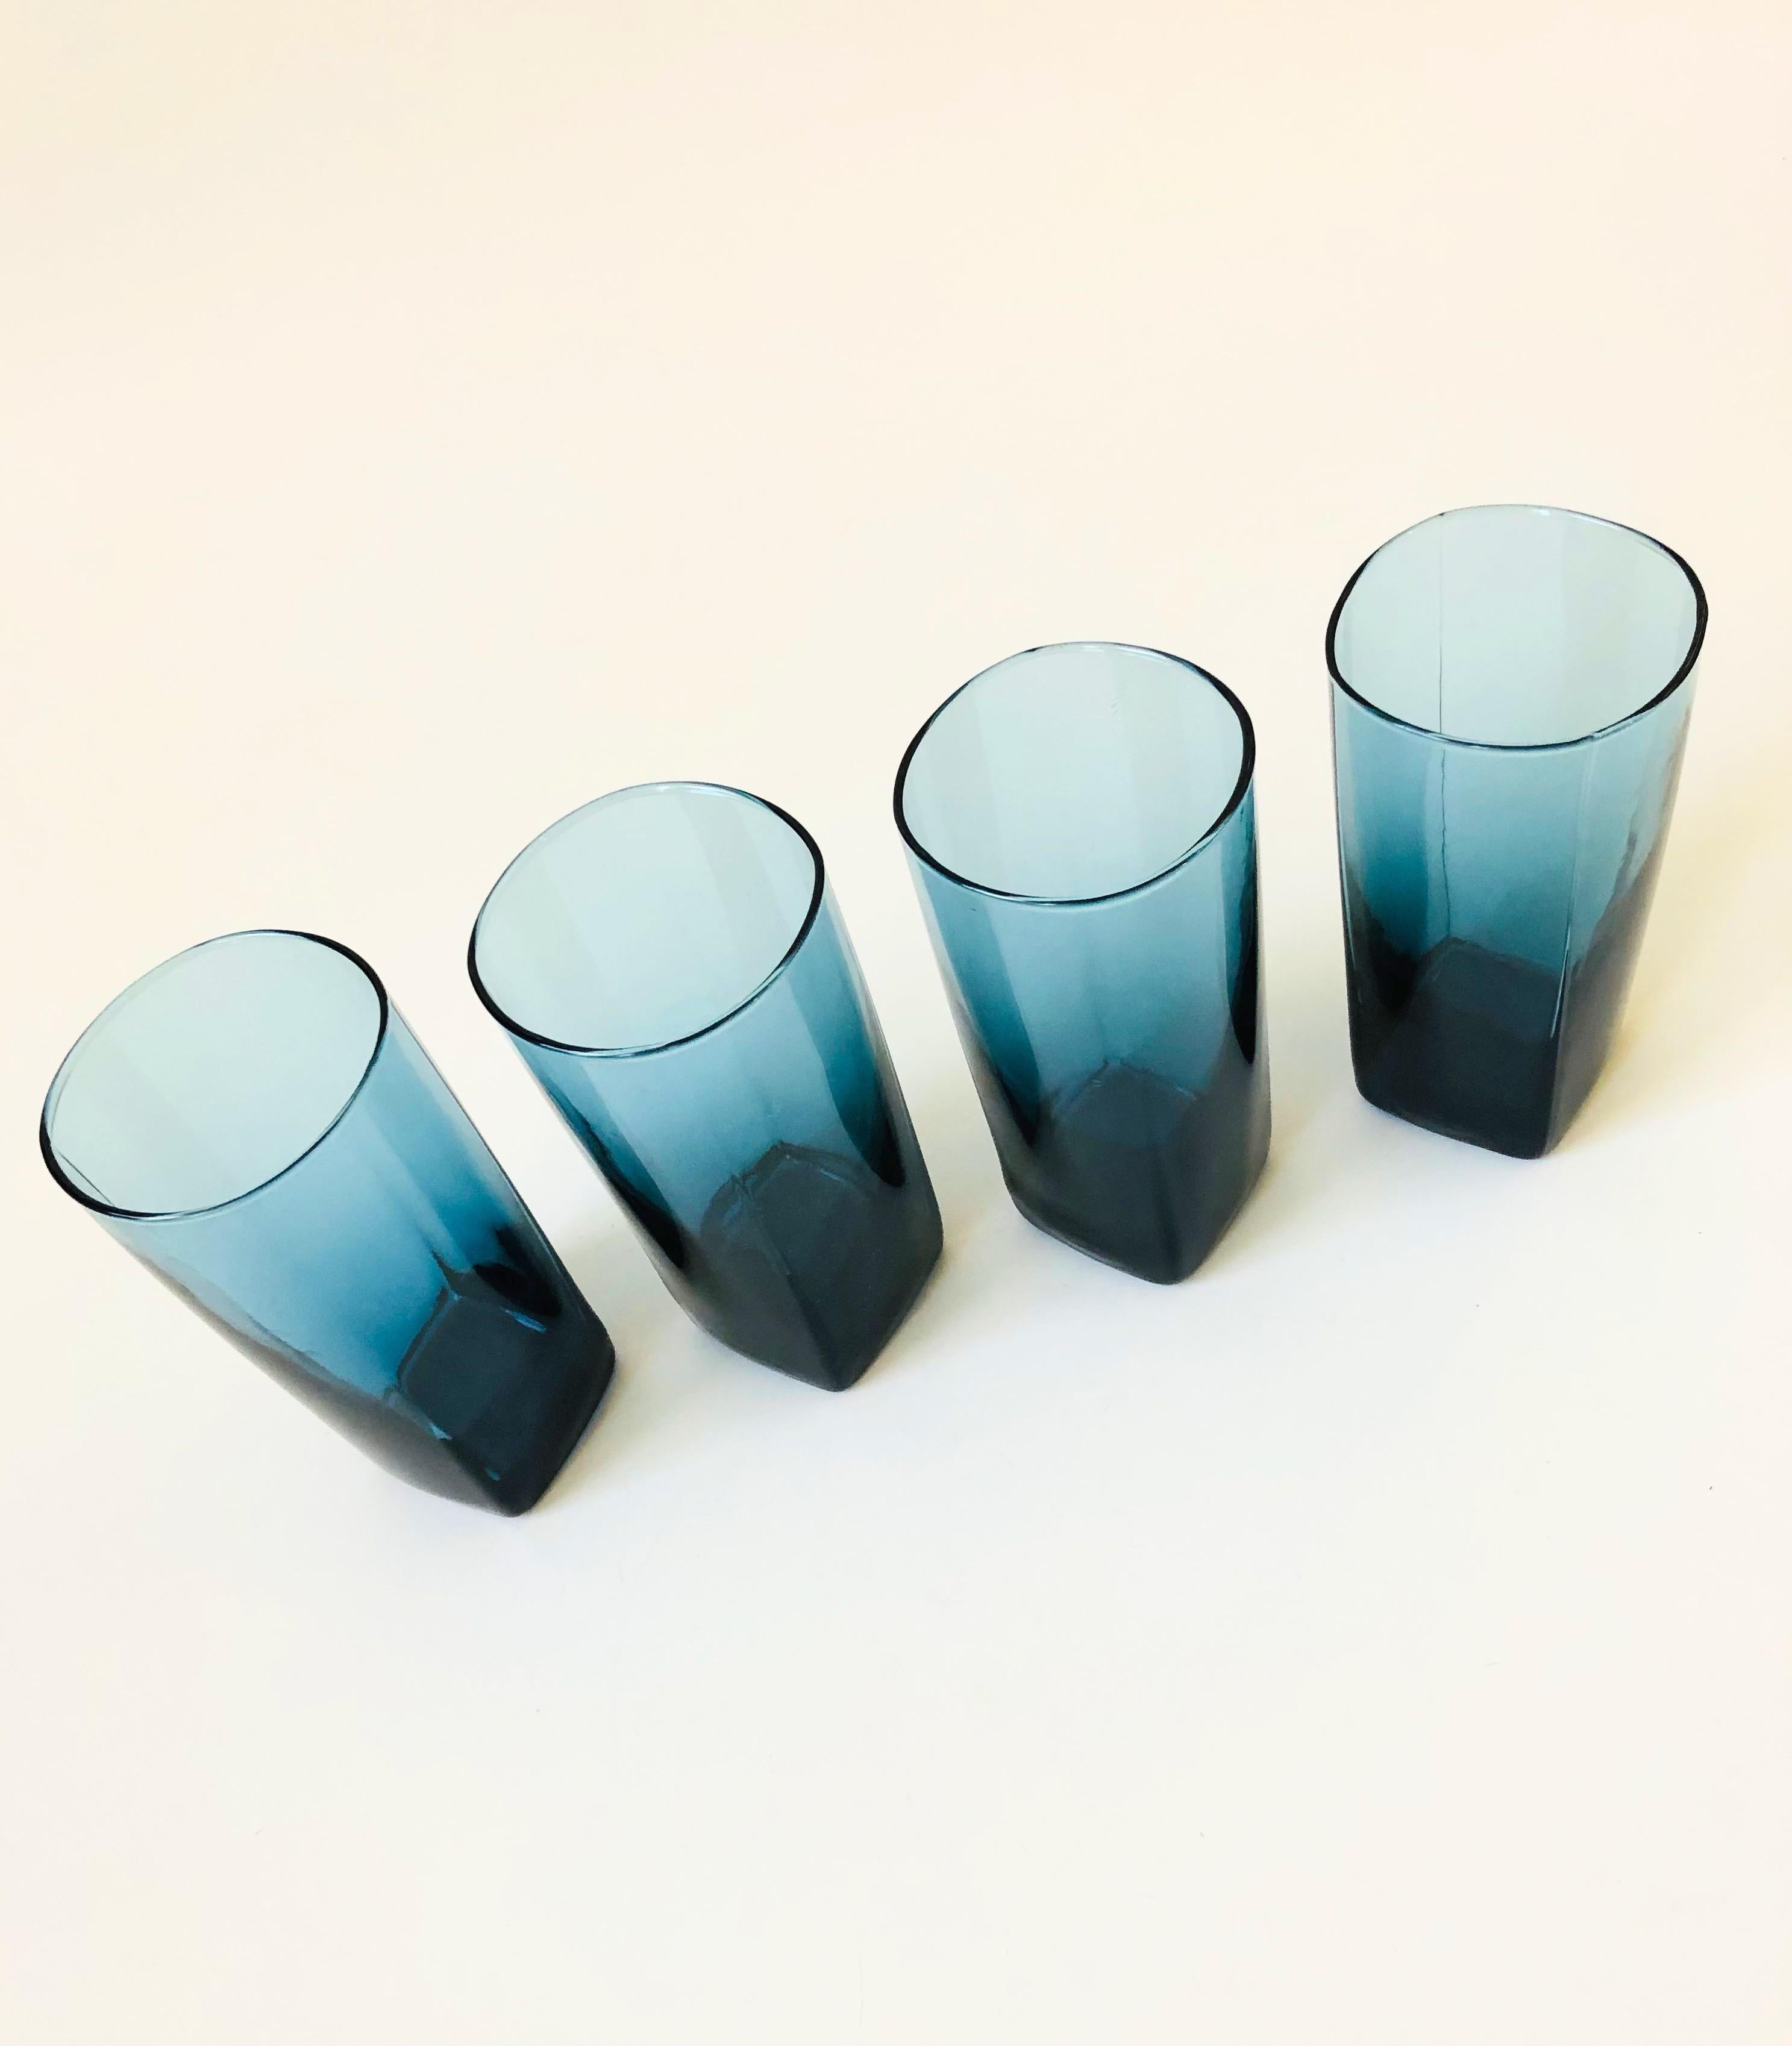 A set of 4 vintage highball glasses in moody dark blue glass. Nice slightly squared shape and thickening of the glass at the base. Perfect for using as water glasses or for cocktails.
   